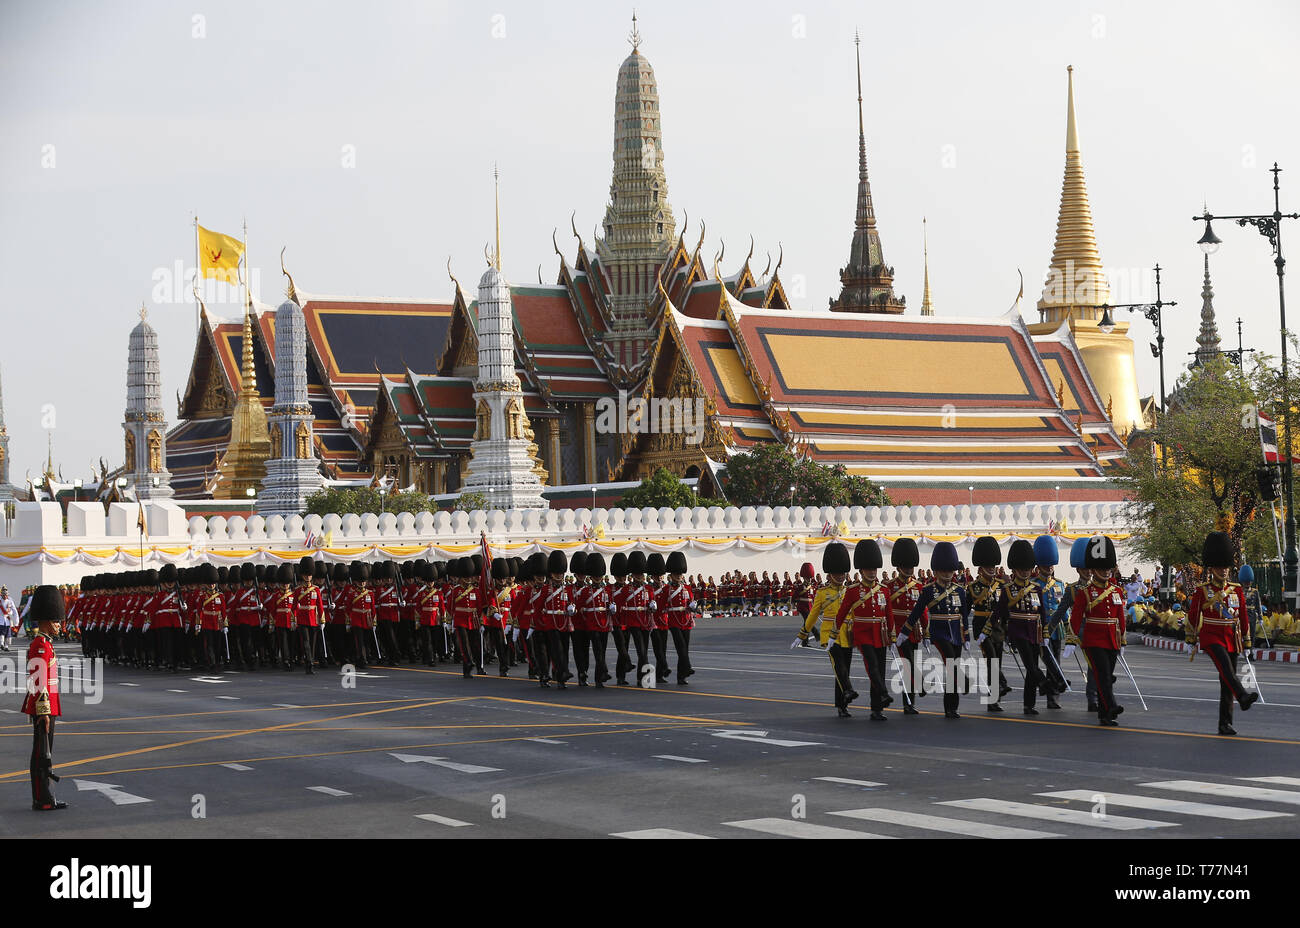 Bangkok, Thailand. 5th May, 2019. Royal guards seen marching during Thailand's King Maha Vajiralongkorn Bodindradebayavarangkun (Rama X) coronation procession on land to encircle the city to give the people the opportunity to attend and pay homage to their new King. Credit: Chaiwat Subprasom/SOPA Images/ZUMA Wire/Alamy Live News Stock Photo